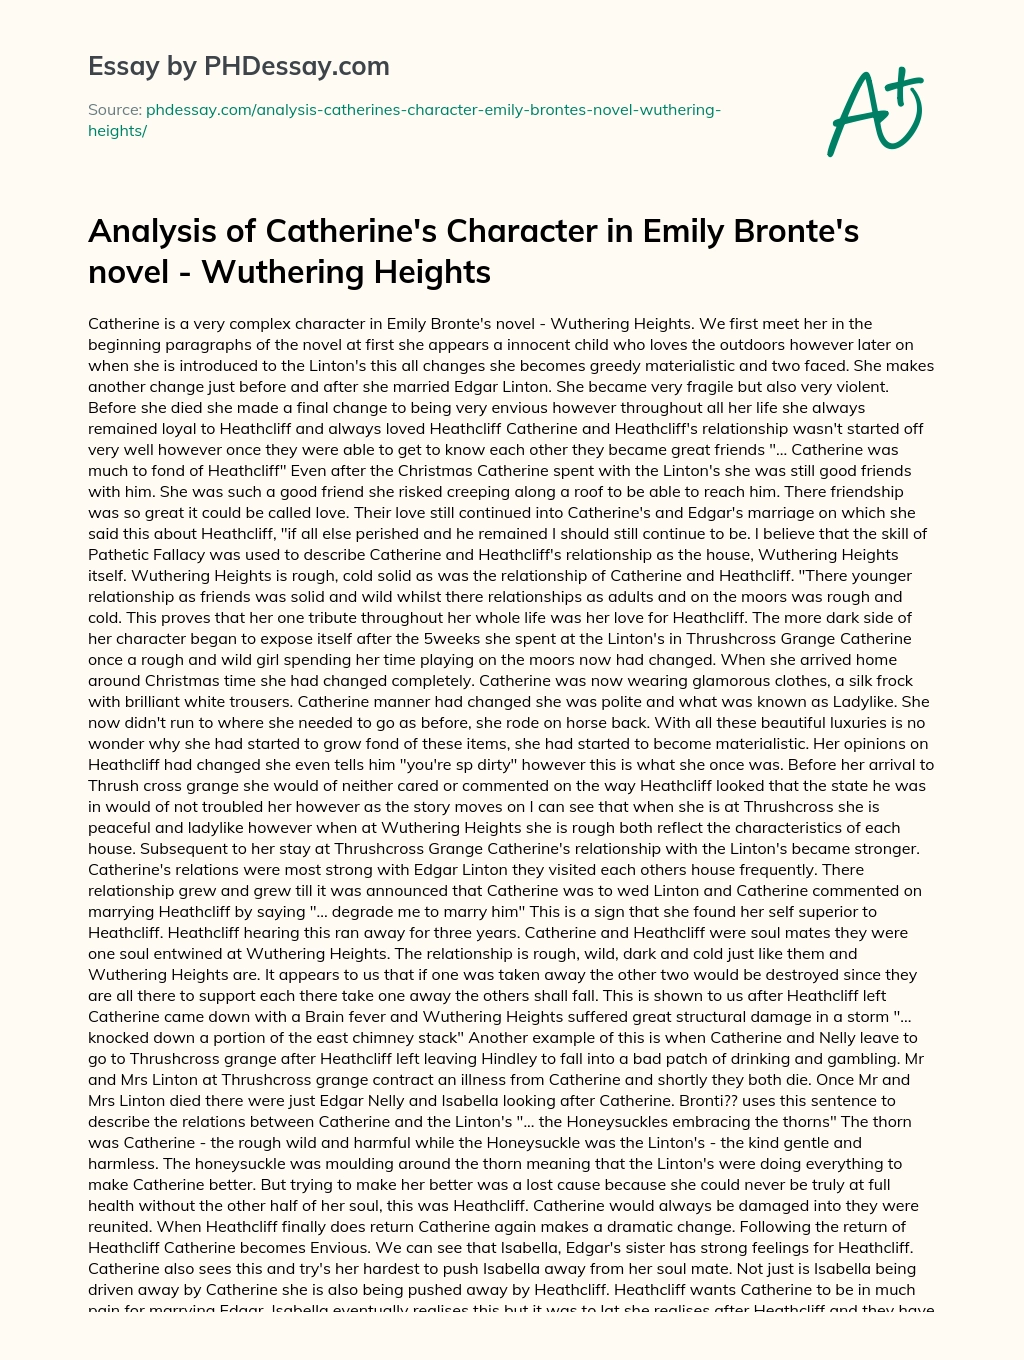 Analysis of Catherine’s Character in Emily Bronte’s novel – Wuthering Heights essay